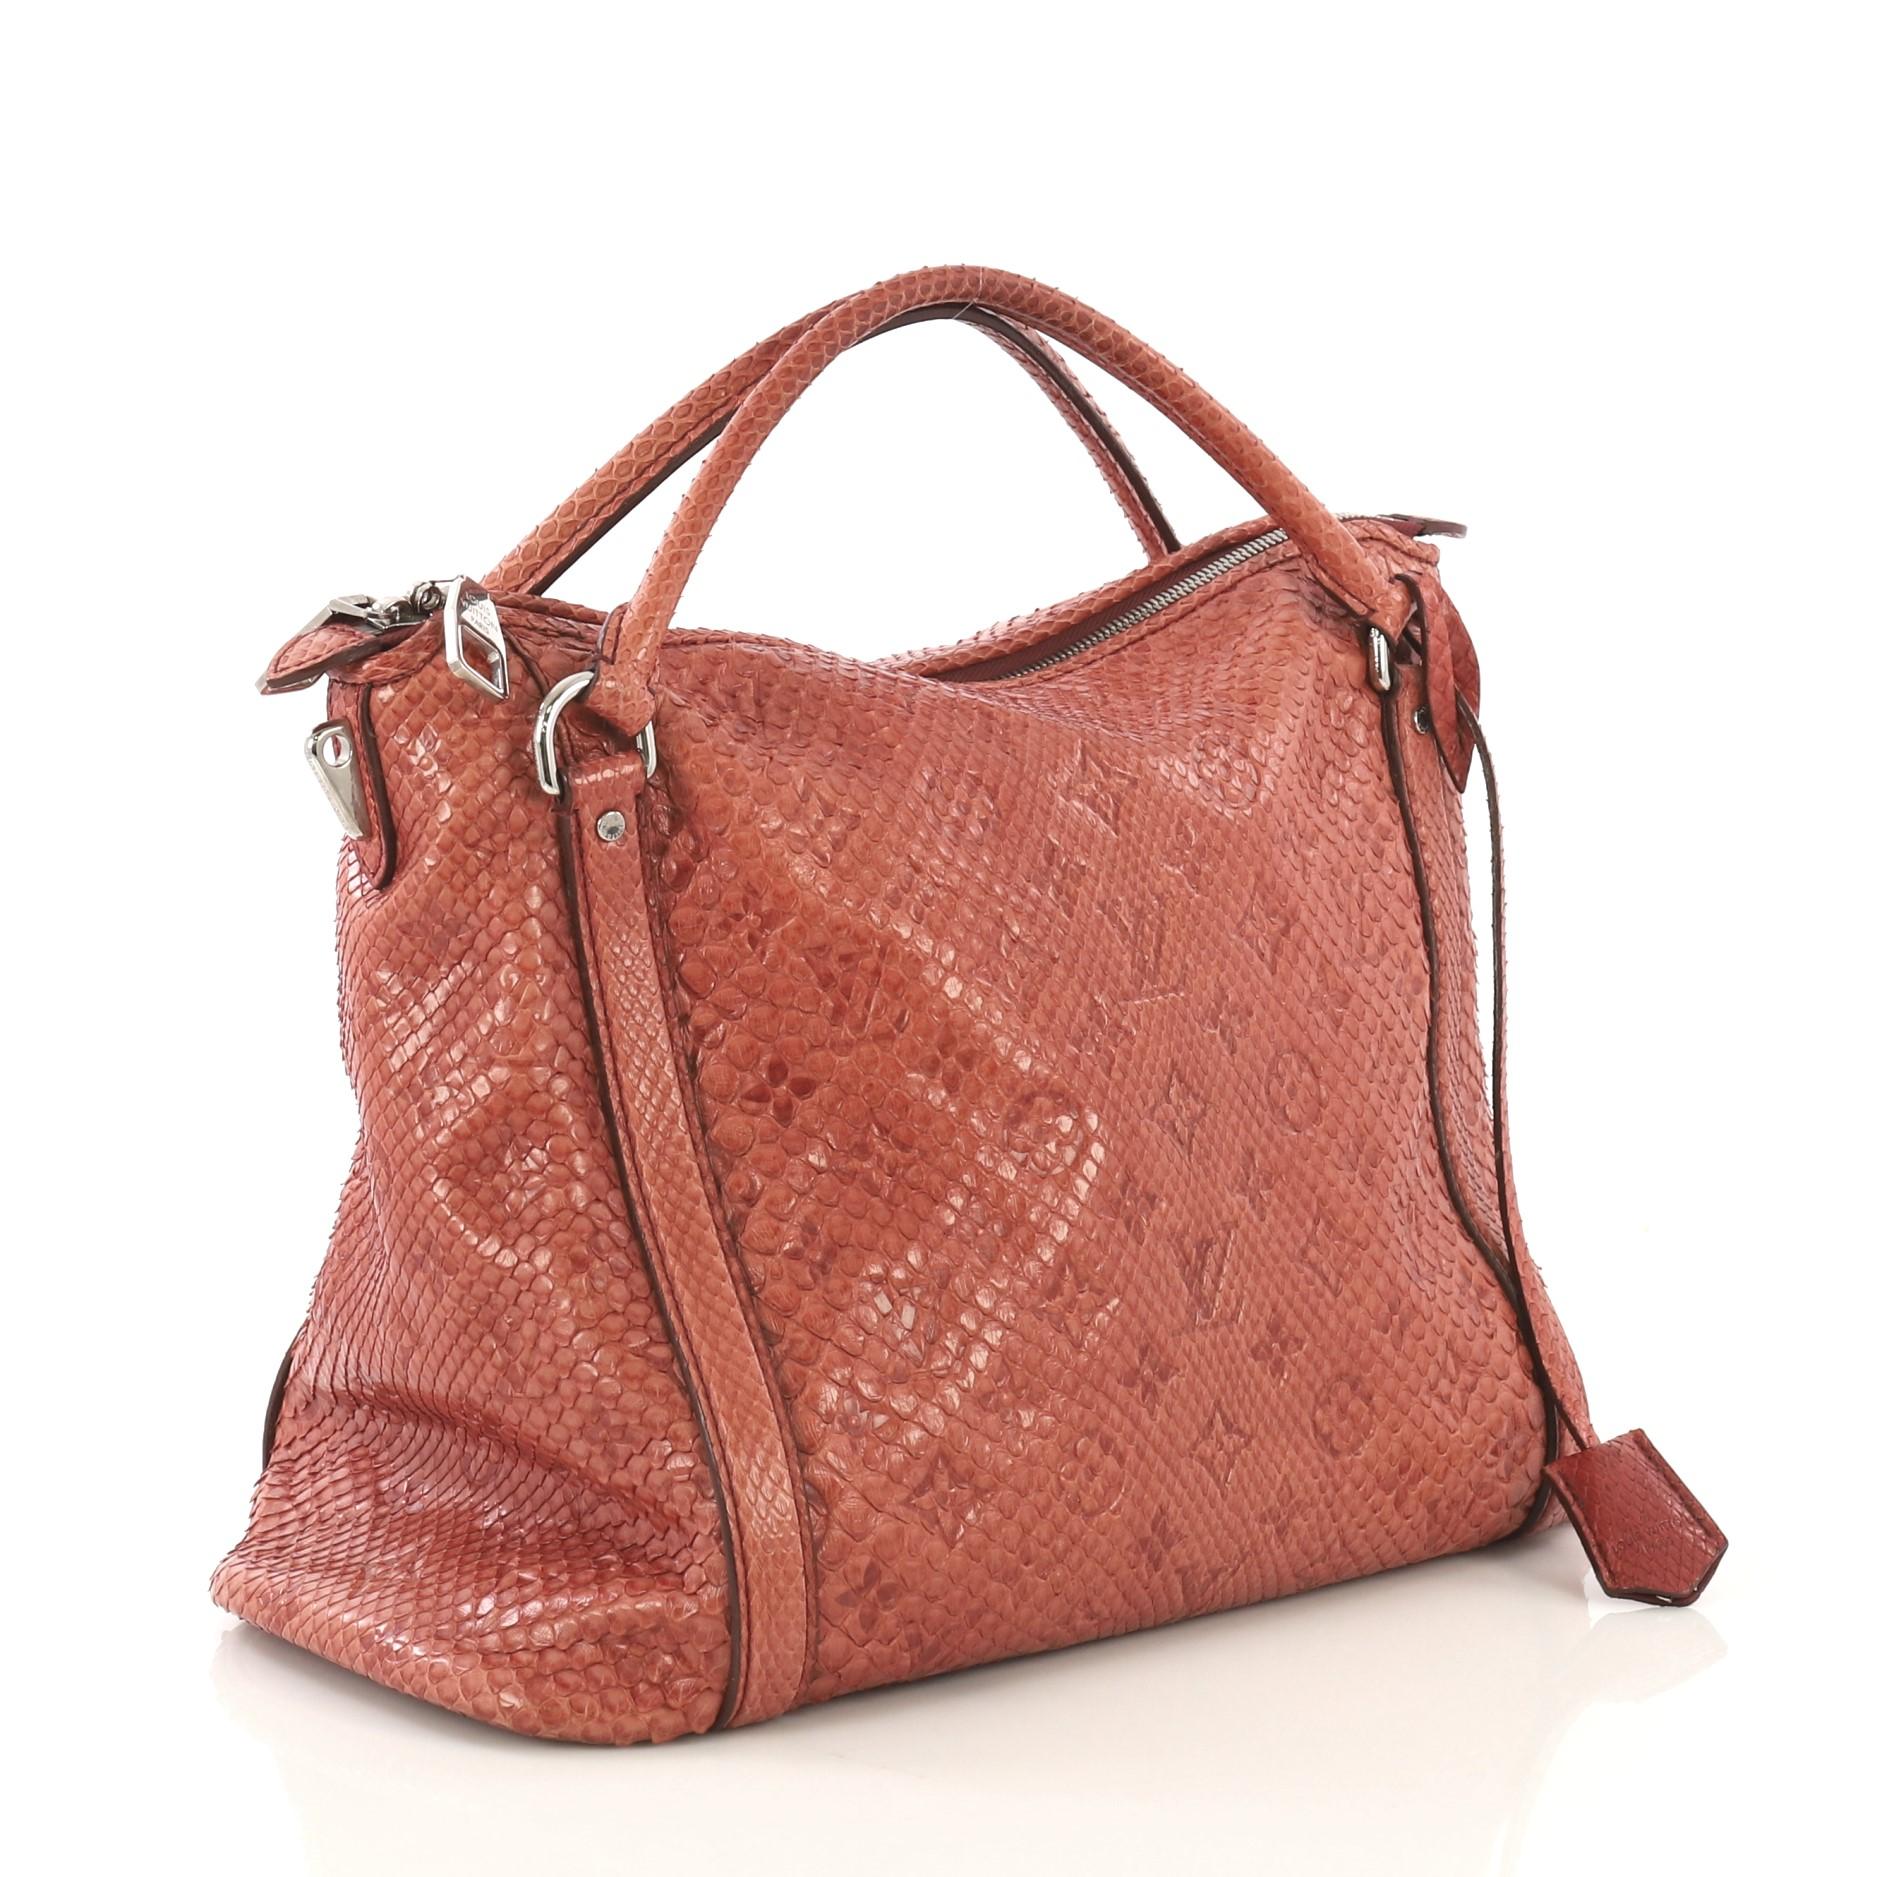 This Louis Vuitton Antheia Ixia Handbag Python PM, crafted in genuine pink python, features dual rolled leather handles, monogram flower patterns, and silver-tone hardware. Its zip closure opens to a red leather interior with zip and slip pockets.